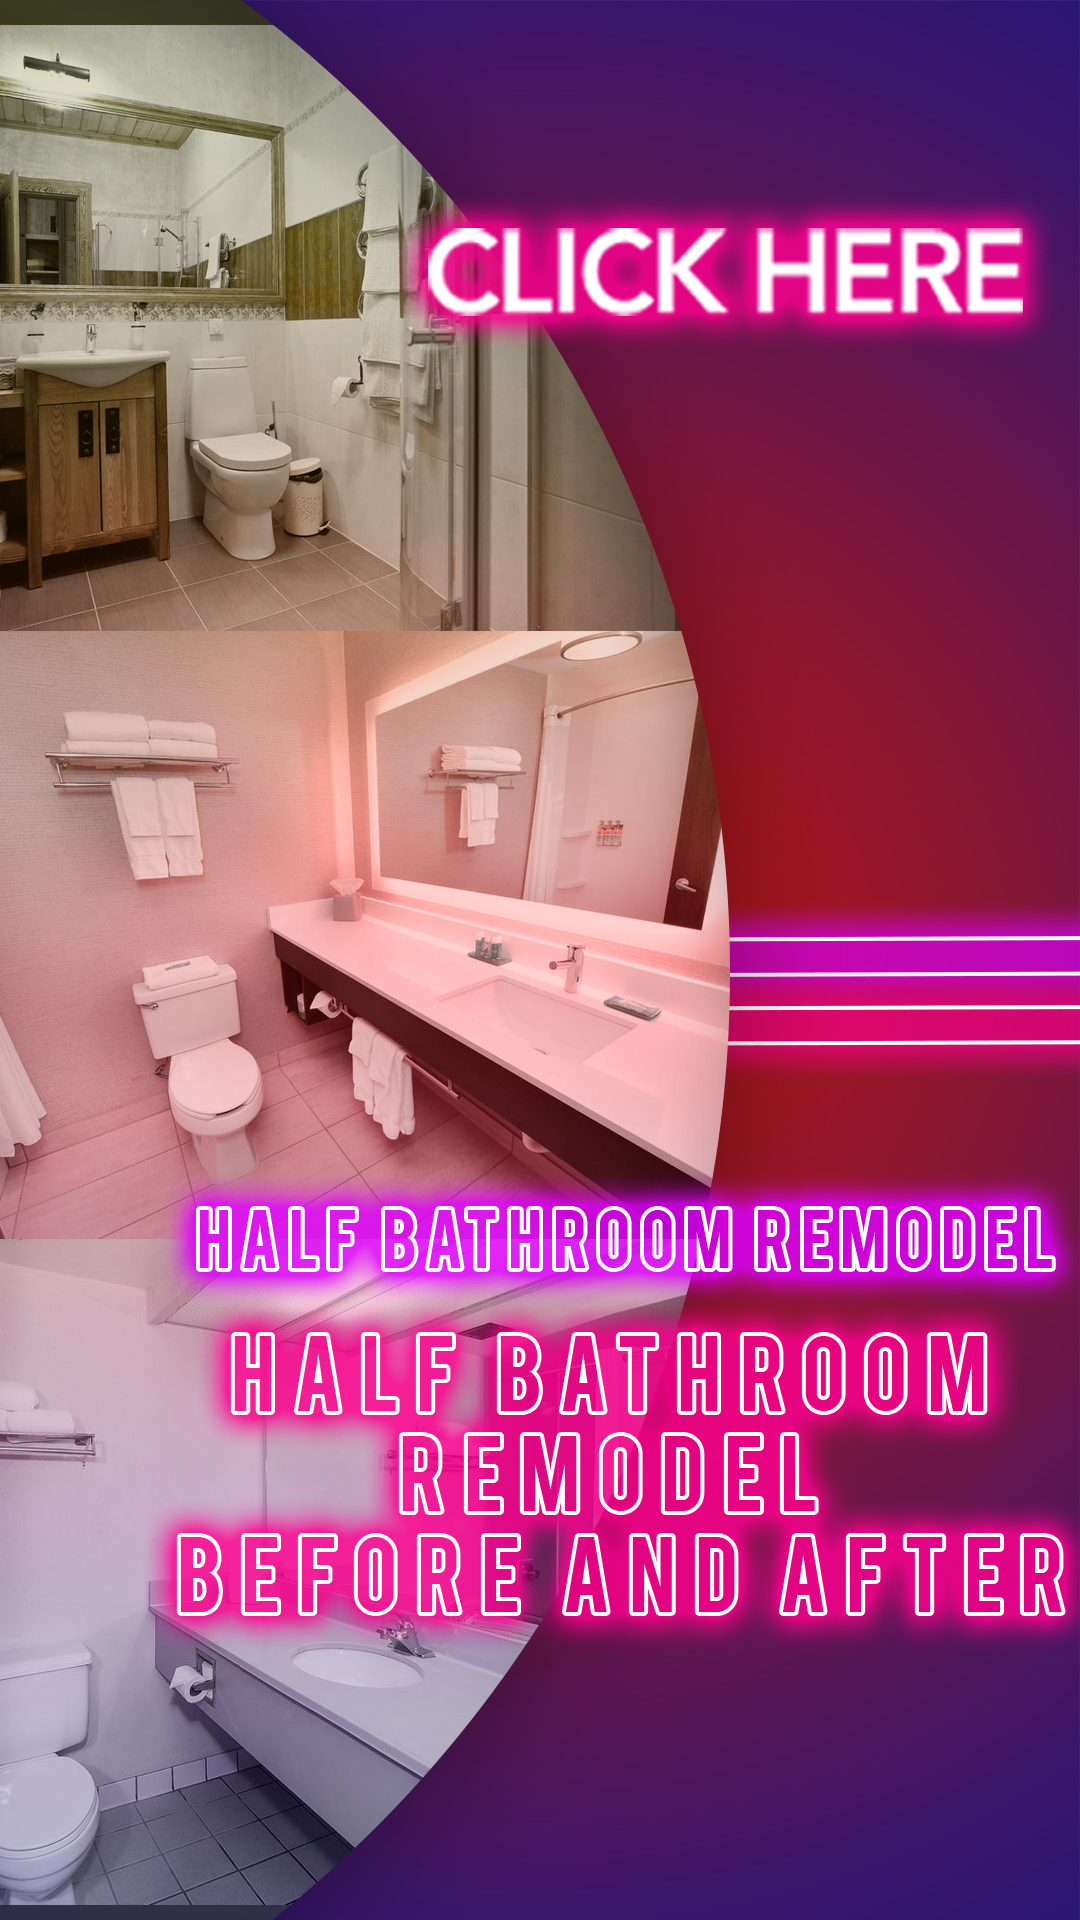 bathroom remodeling ideas on a budget